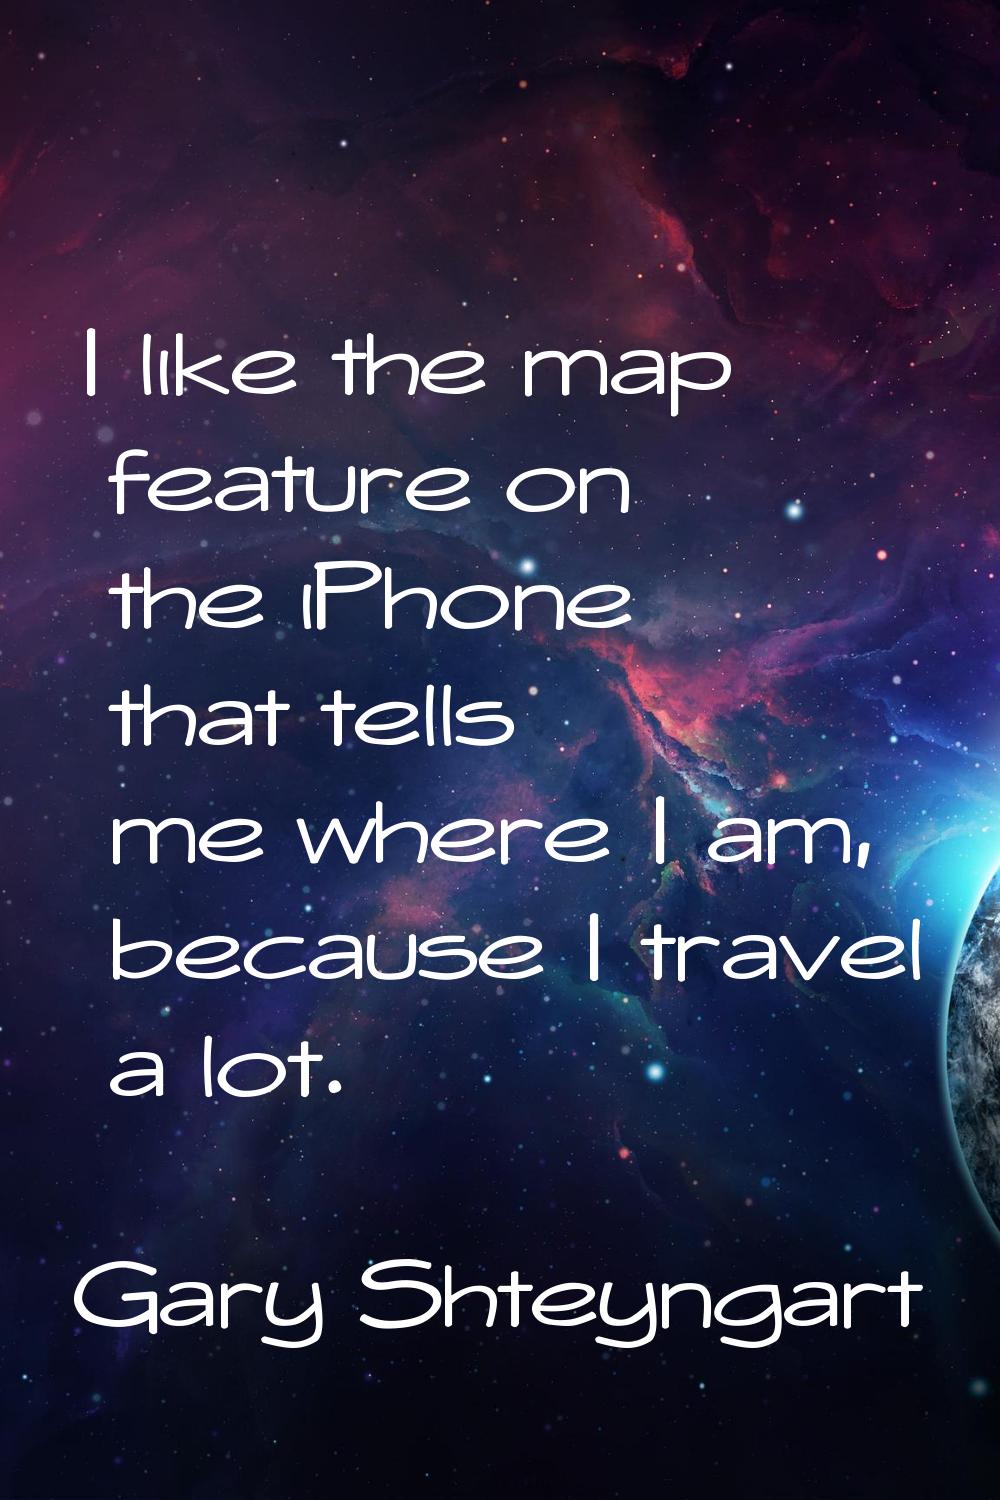 I like the map feature on the iPhone that tells me where I am, because I travel a lot.